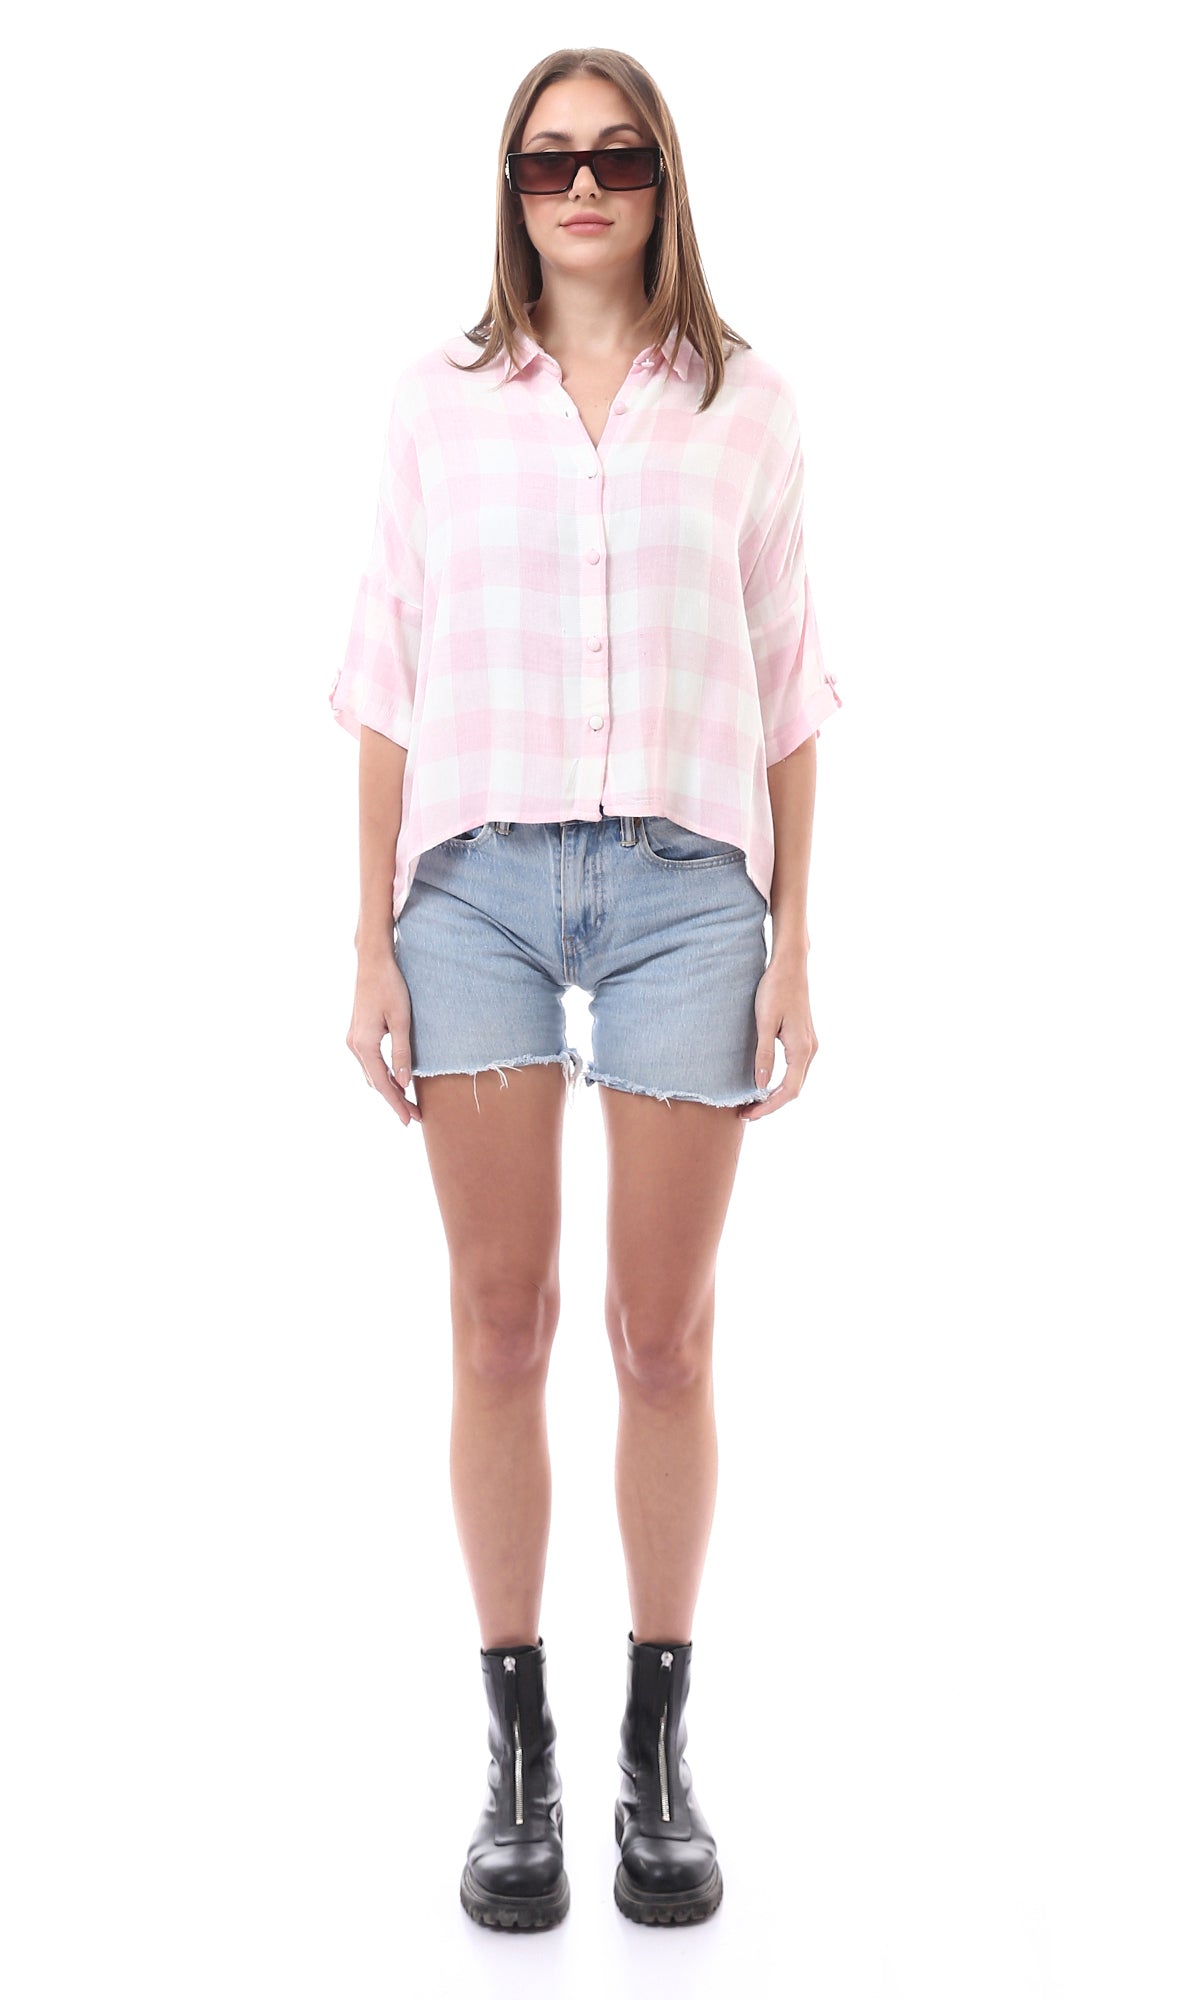 98145 Elbow-Sleeves Buttons Down Plaids Shirt - Pink & White